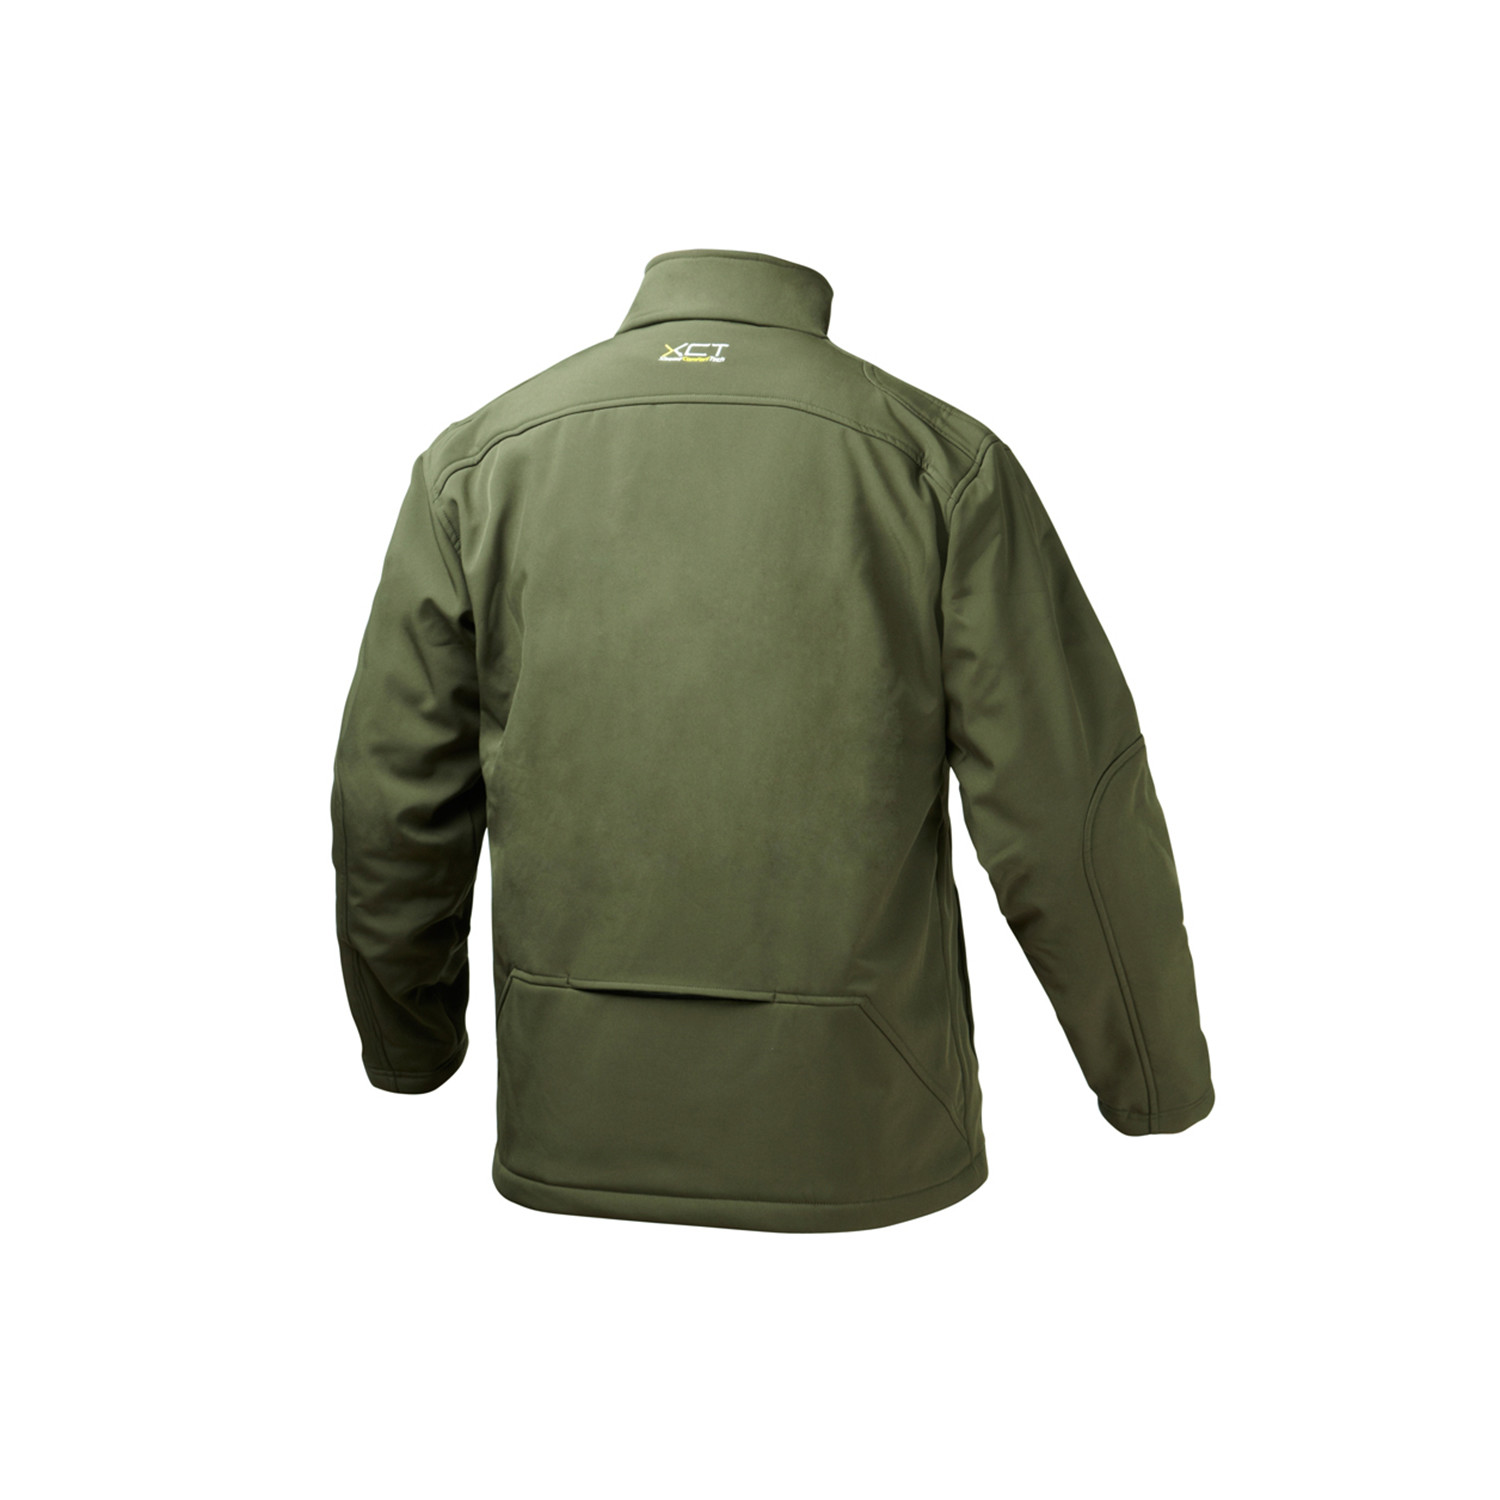 Insulated Soft Shell Heated Jacket // VH-659 (Small) - Venture Heat ...